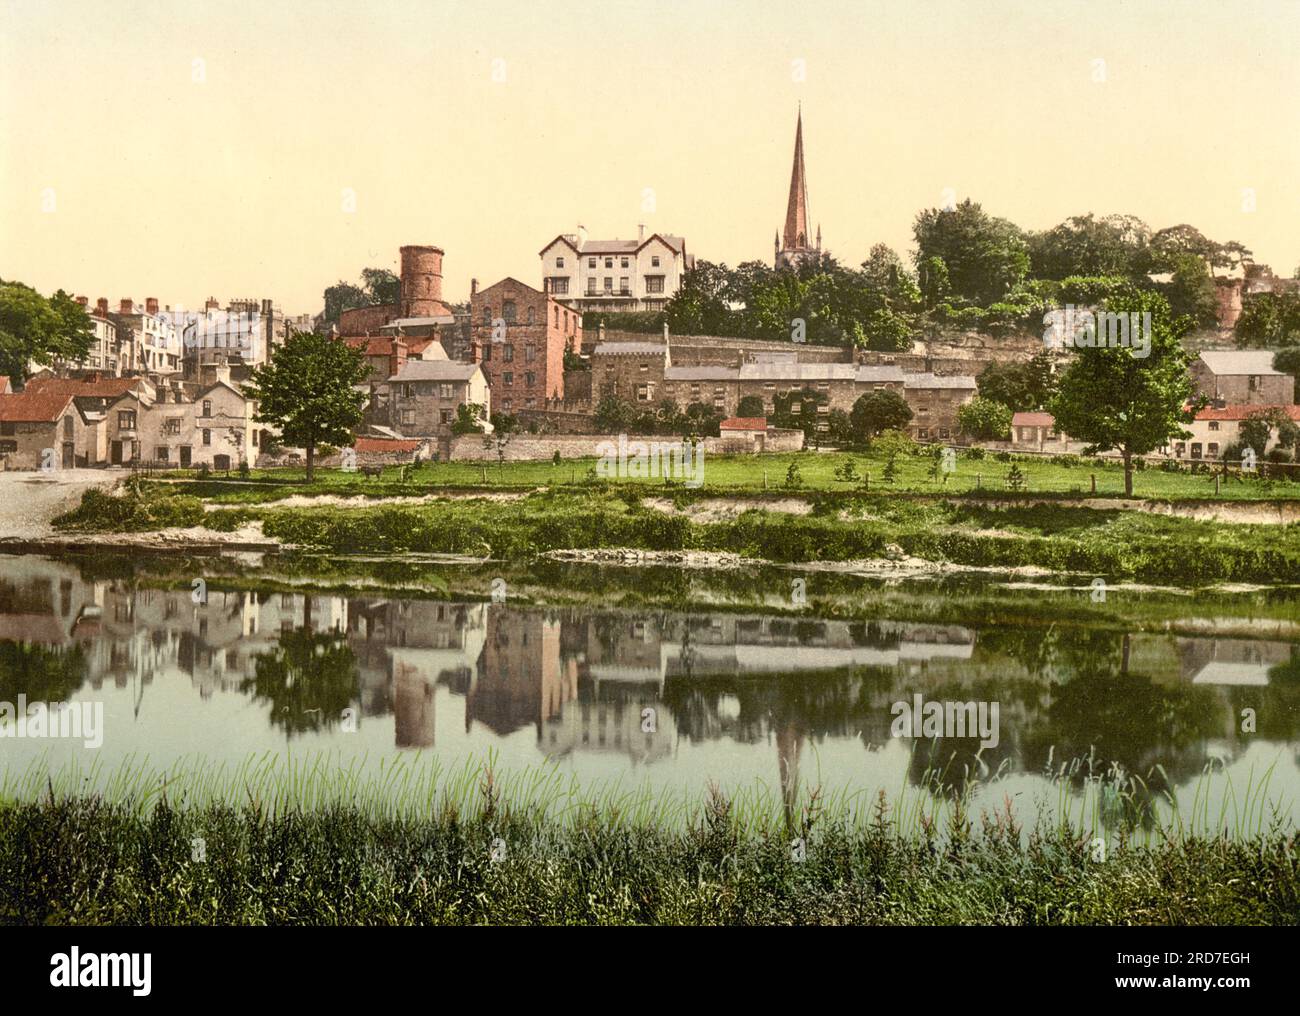 From the river, Ross-on-Wye, a market town and civil parish in Herefordshire, England, 1895, Historical, digital improved reproduction of an old Photochrome print Stock Photo